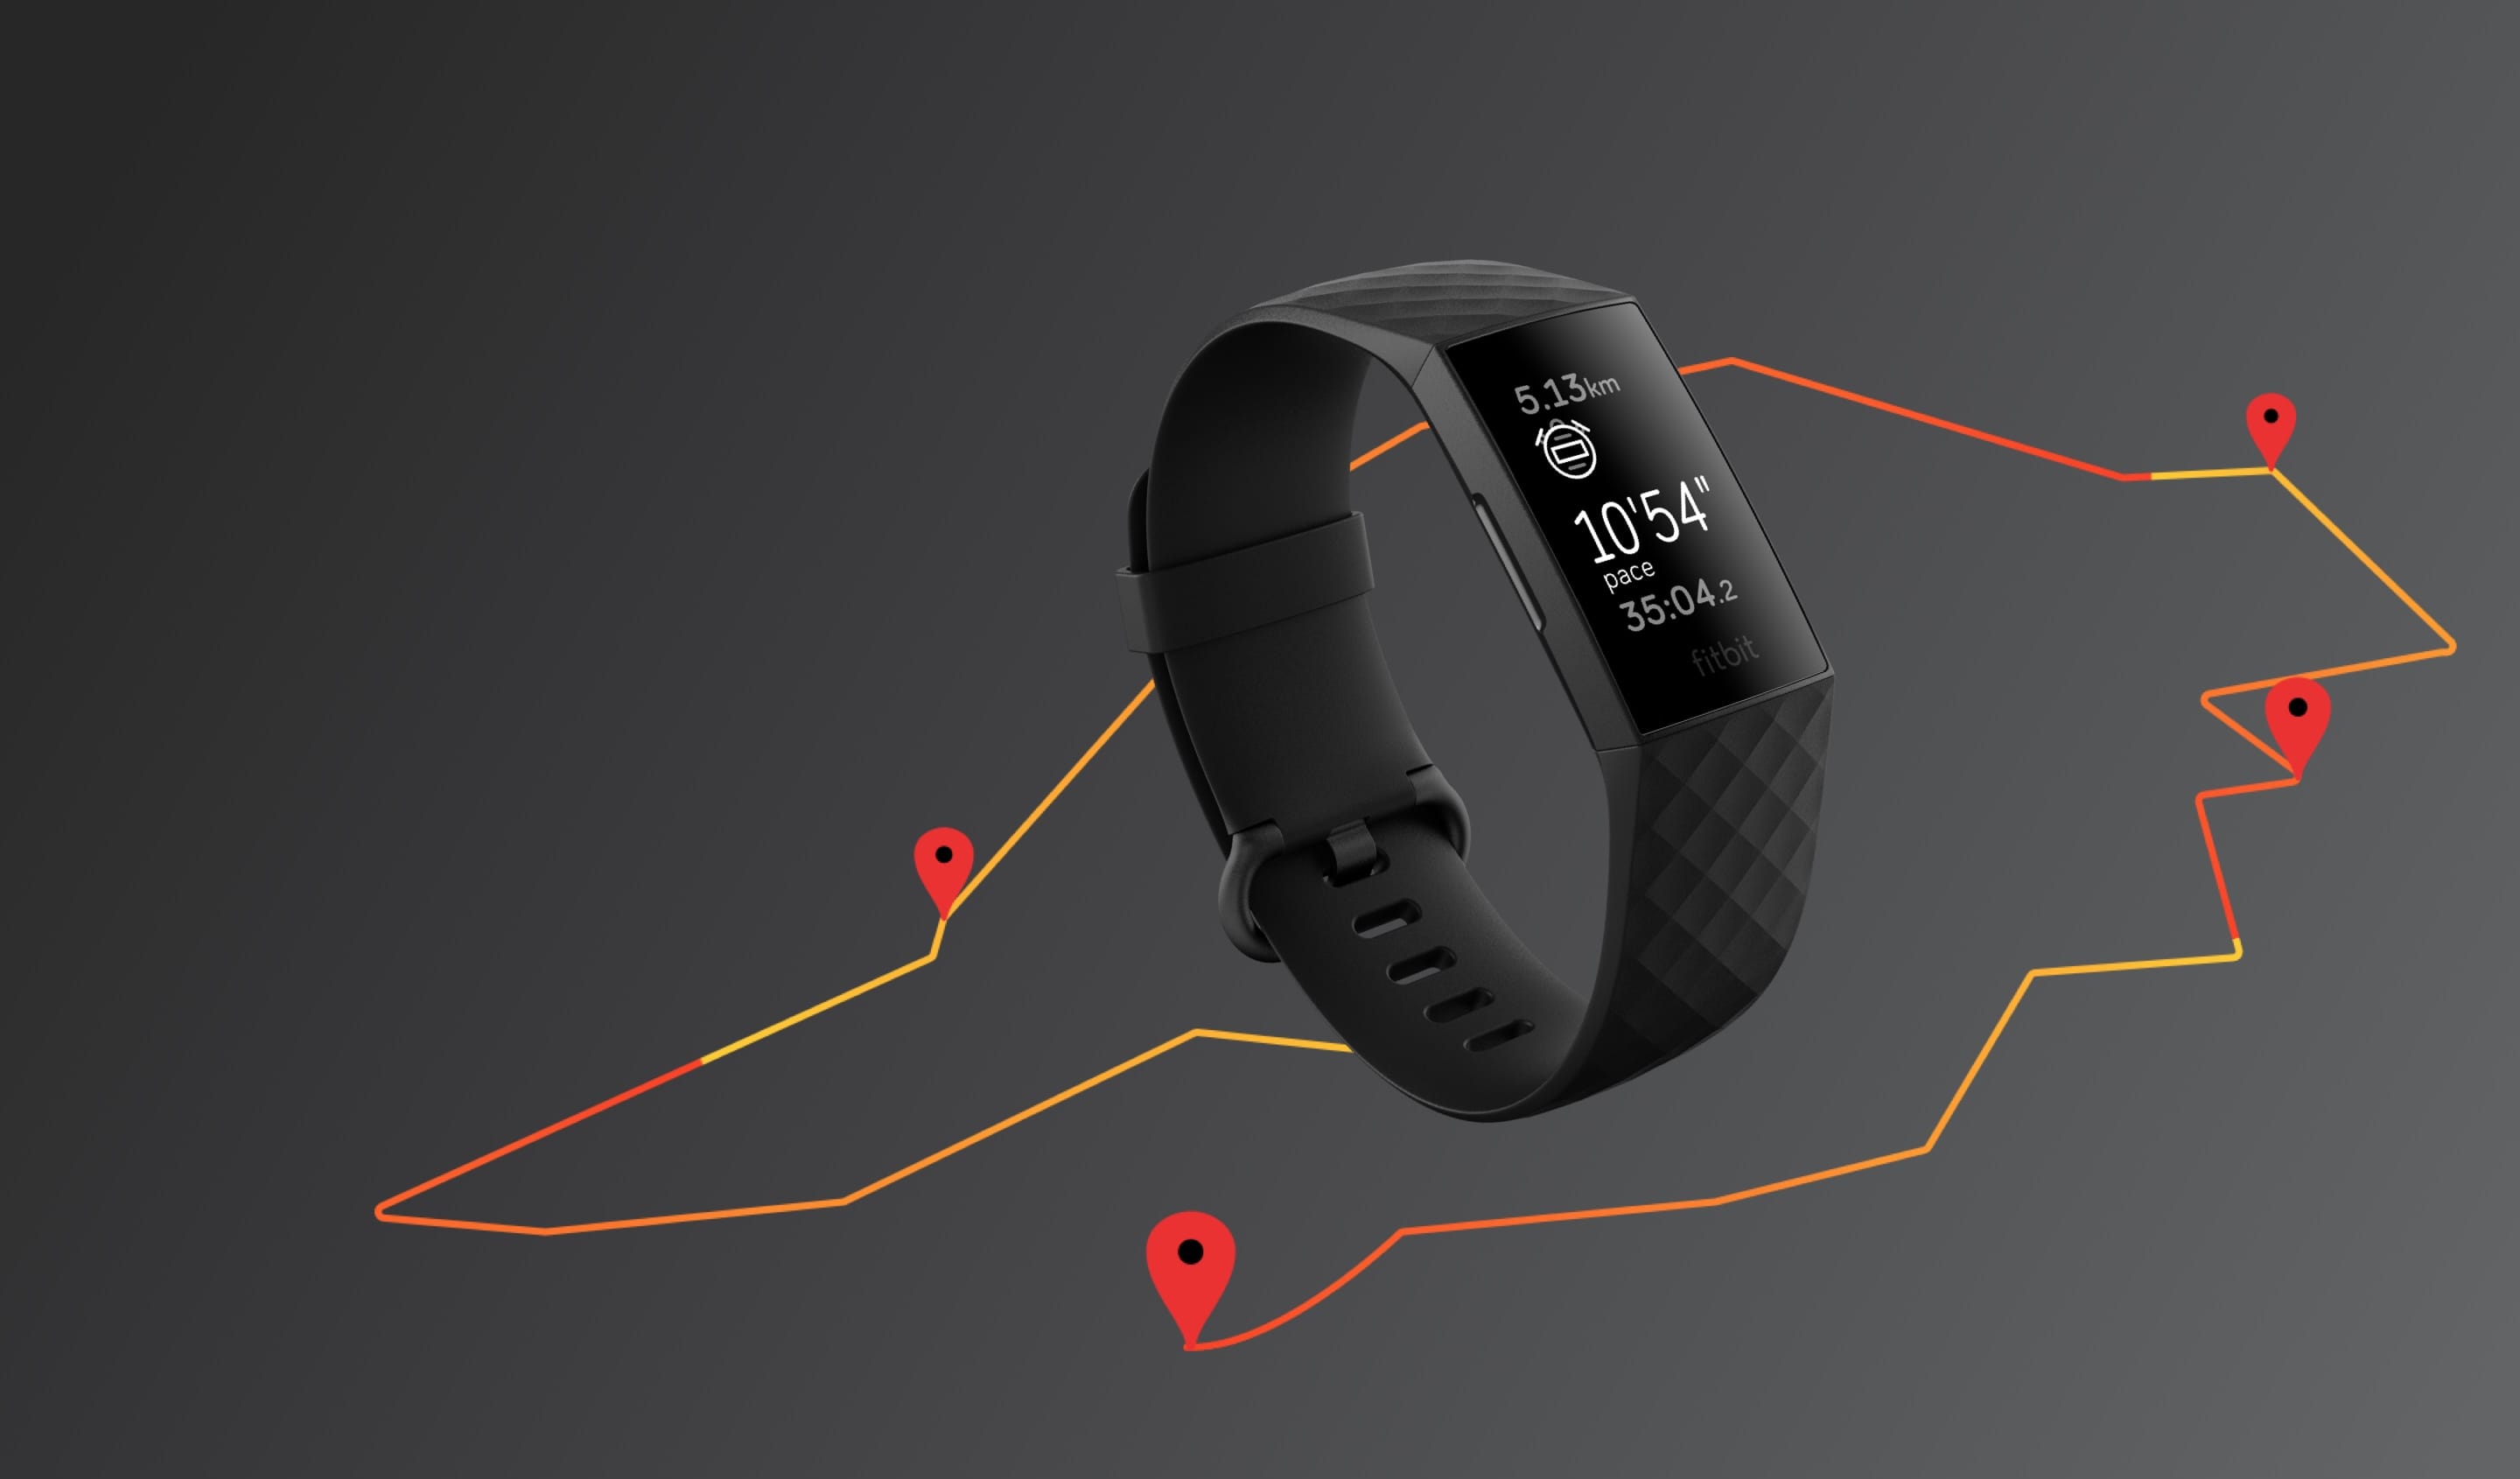 fitbit for running gps